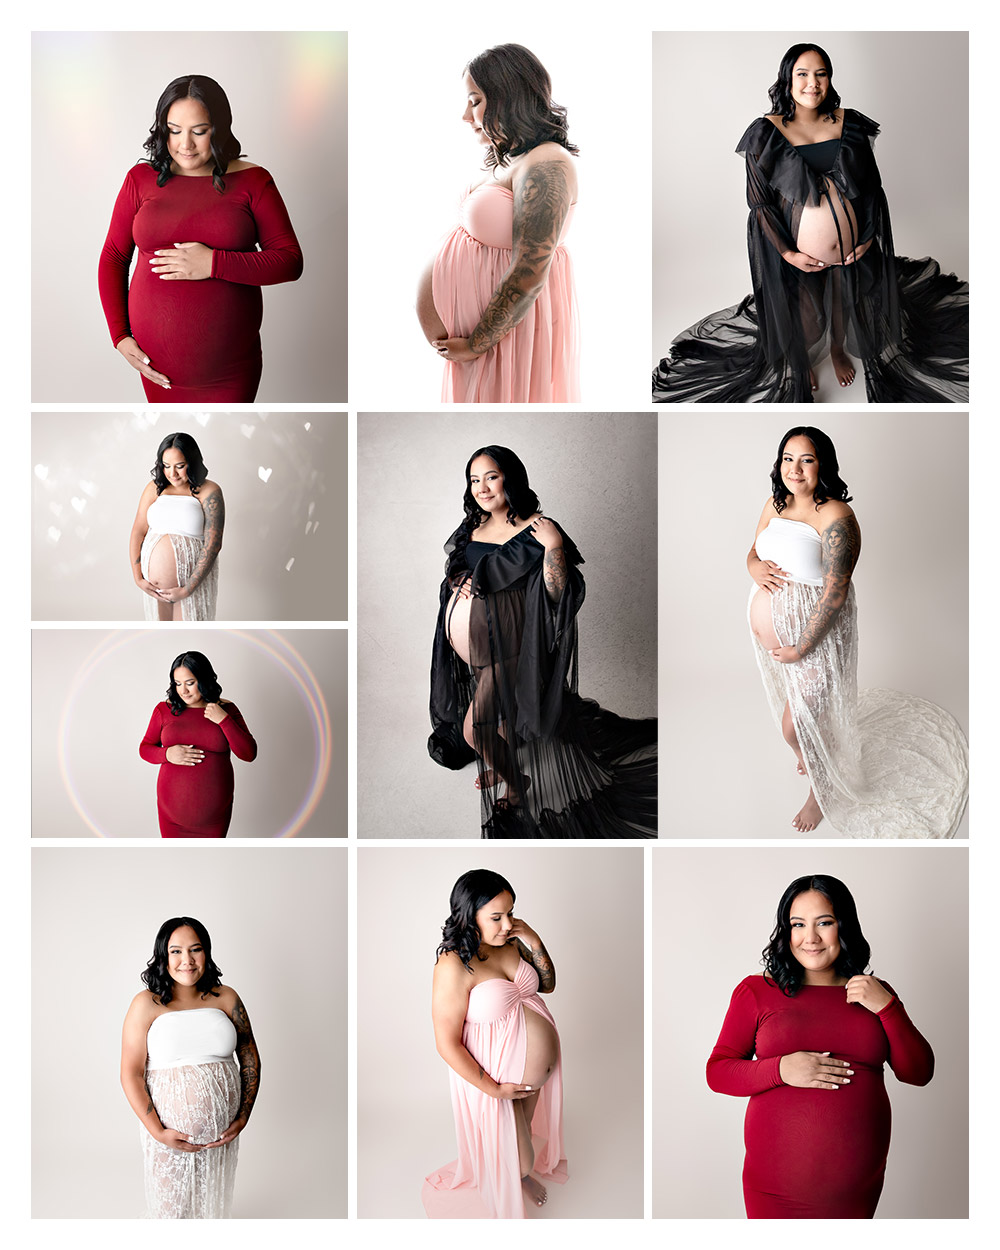 photos from a maternity session with Kristin Tiffany Photography